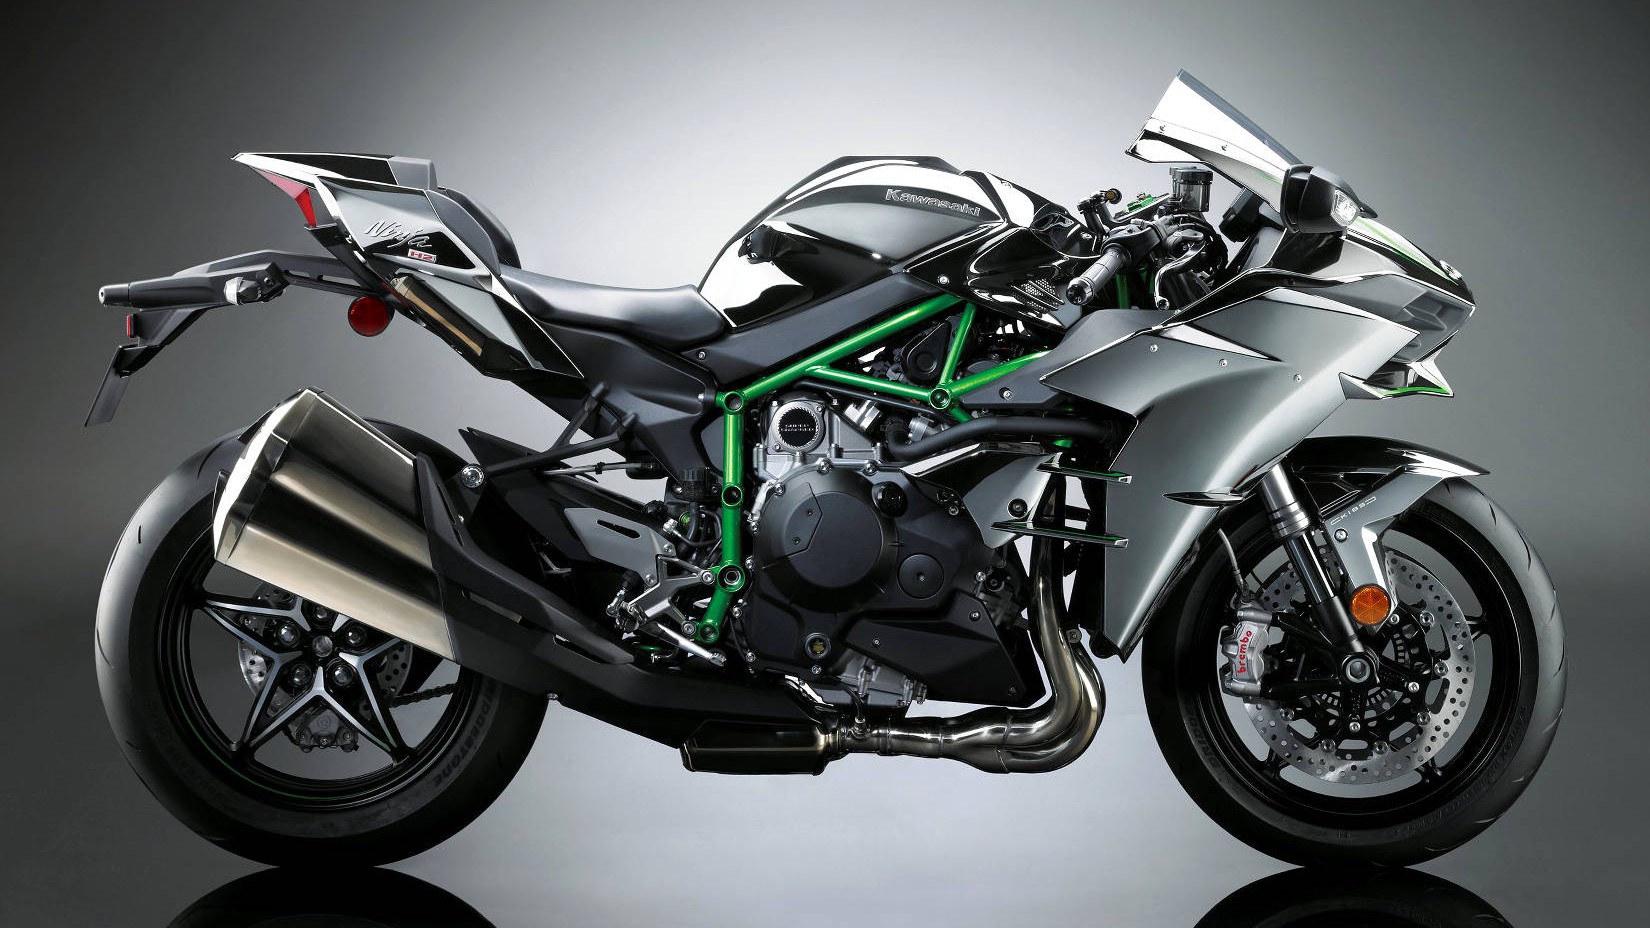 Watch: Kawasaki Ninja H2 - The Only Supercharged Production Bike In ...